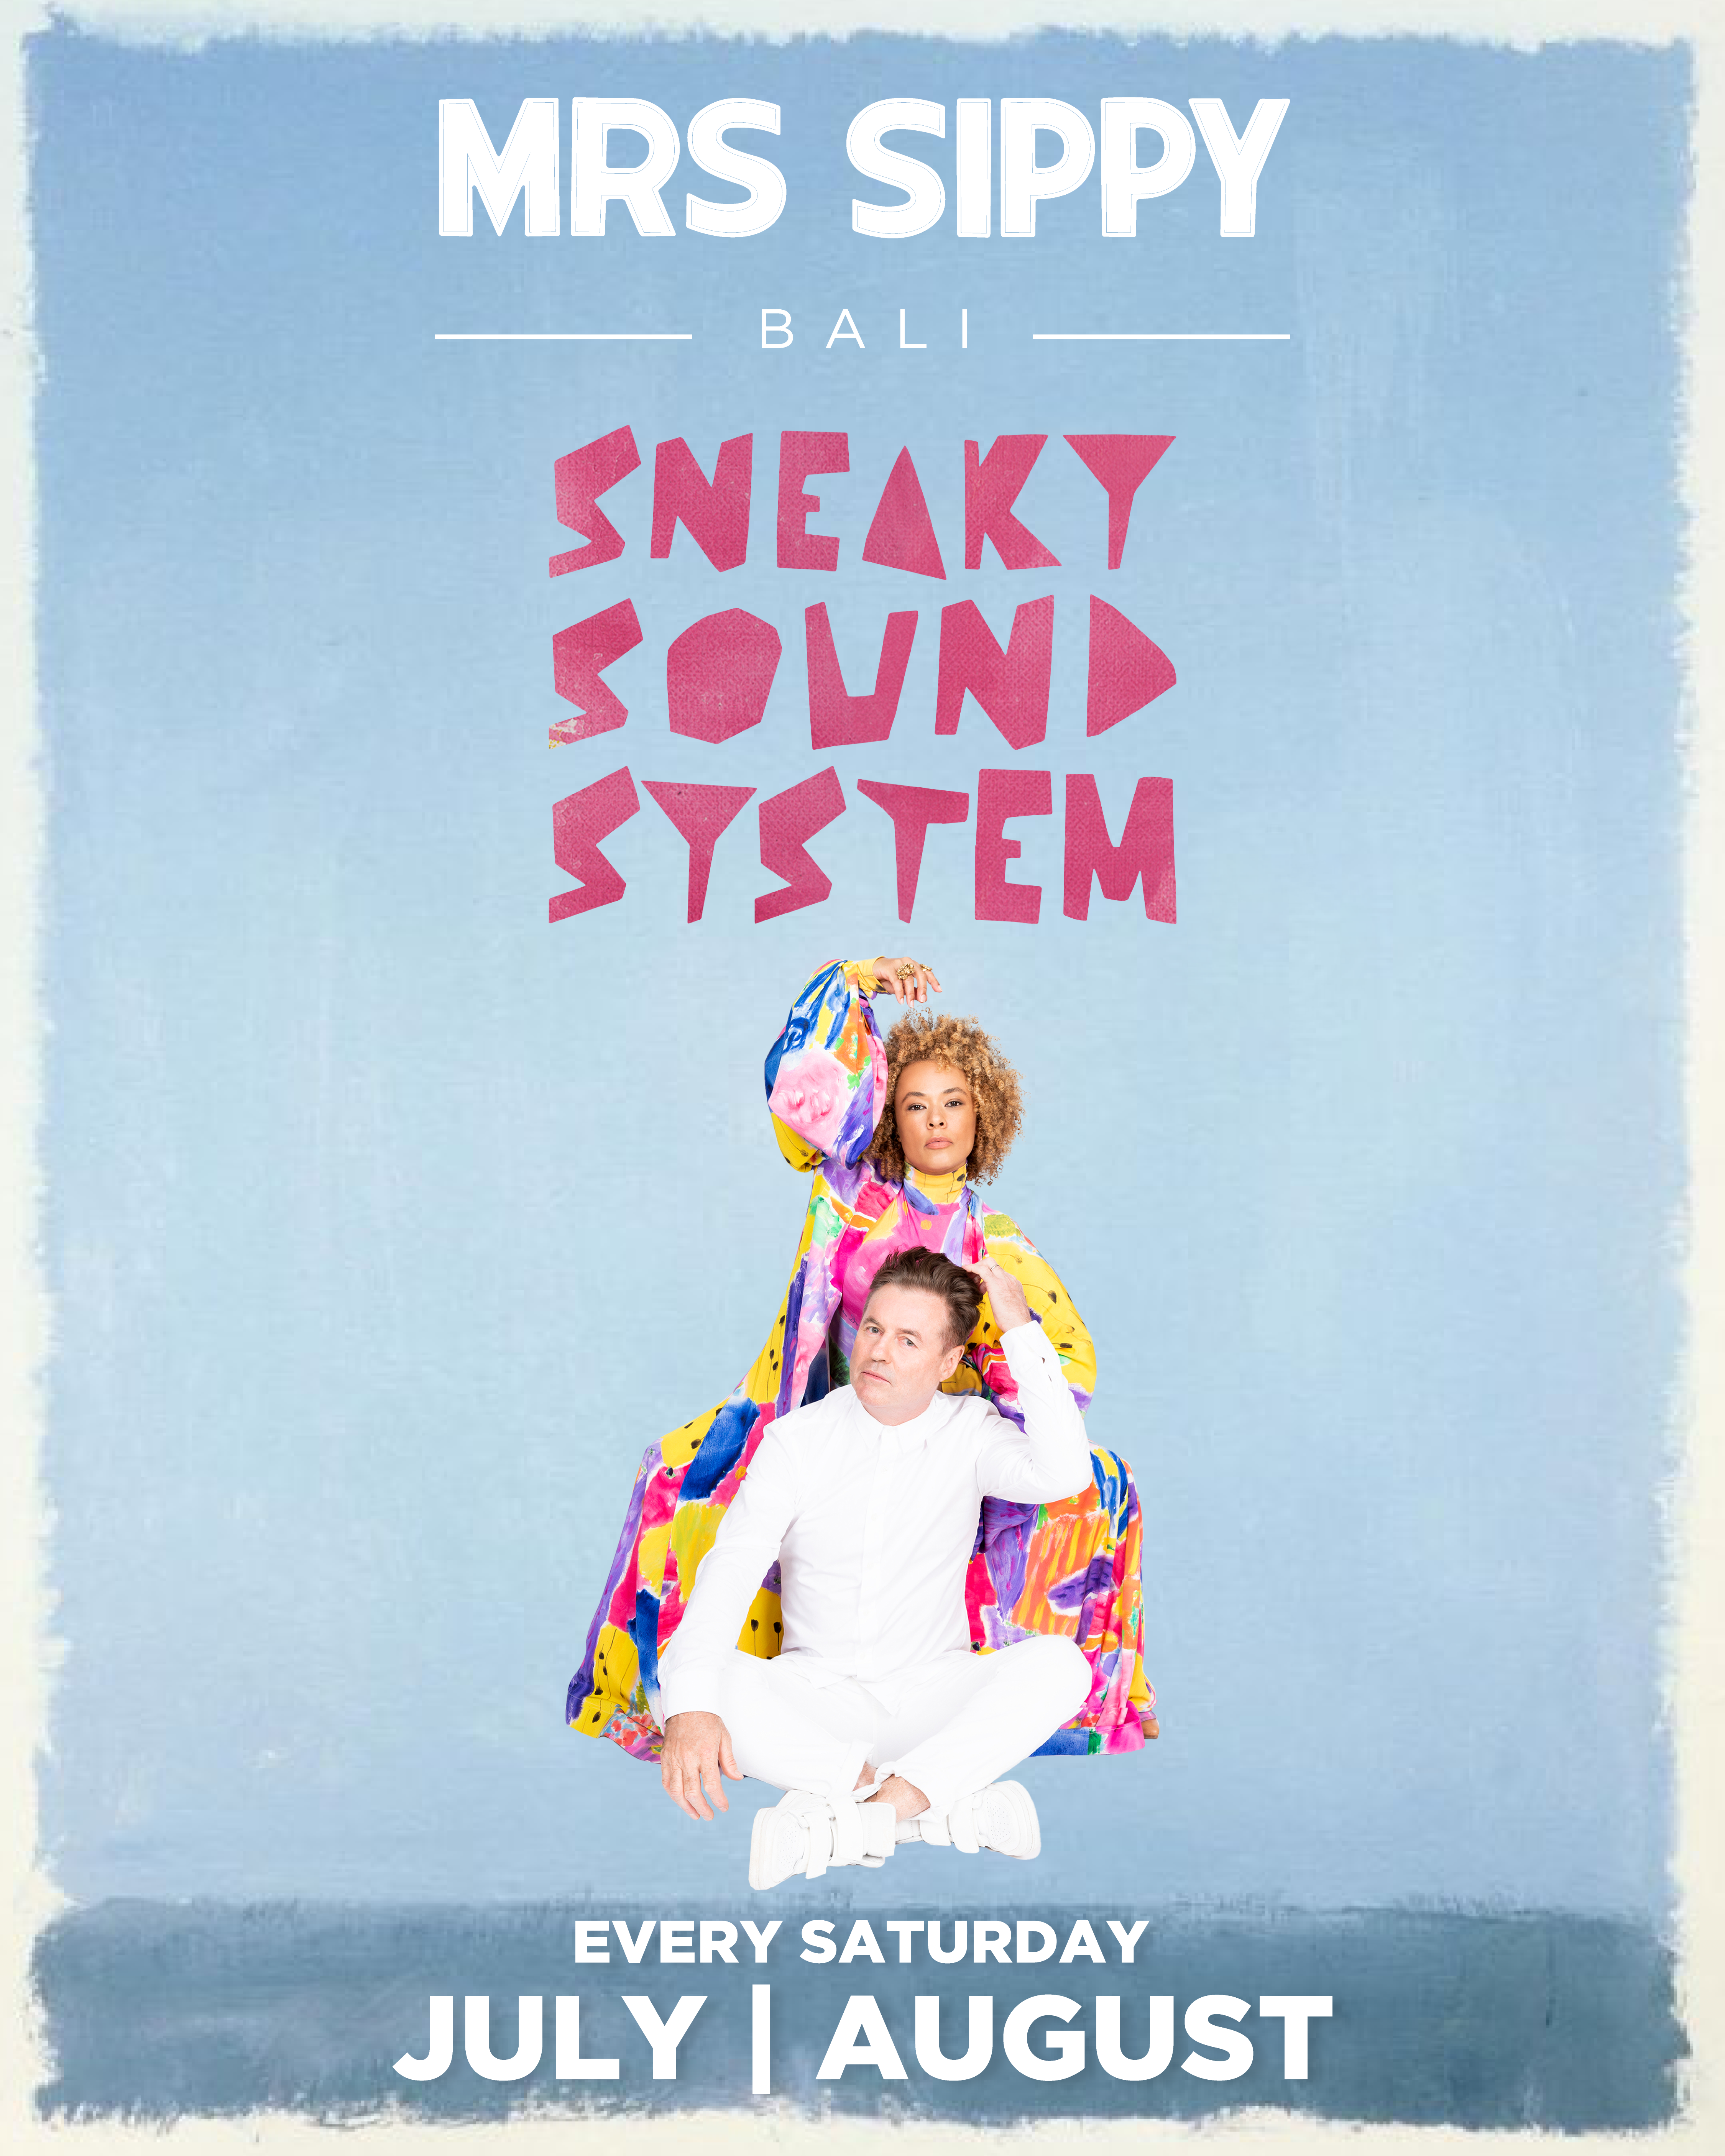 MRS SIPPY PRESENTS SNEAKY SOUND SYSTEM – EVERY SATURDAY JULY & AUGUST thumbnail image